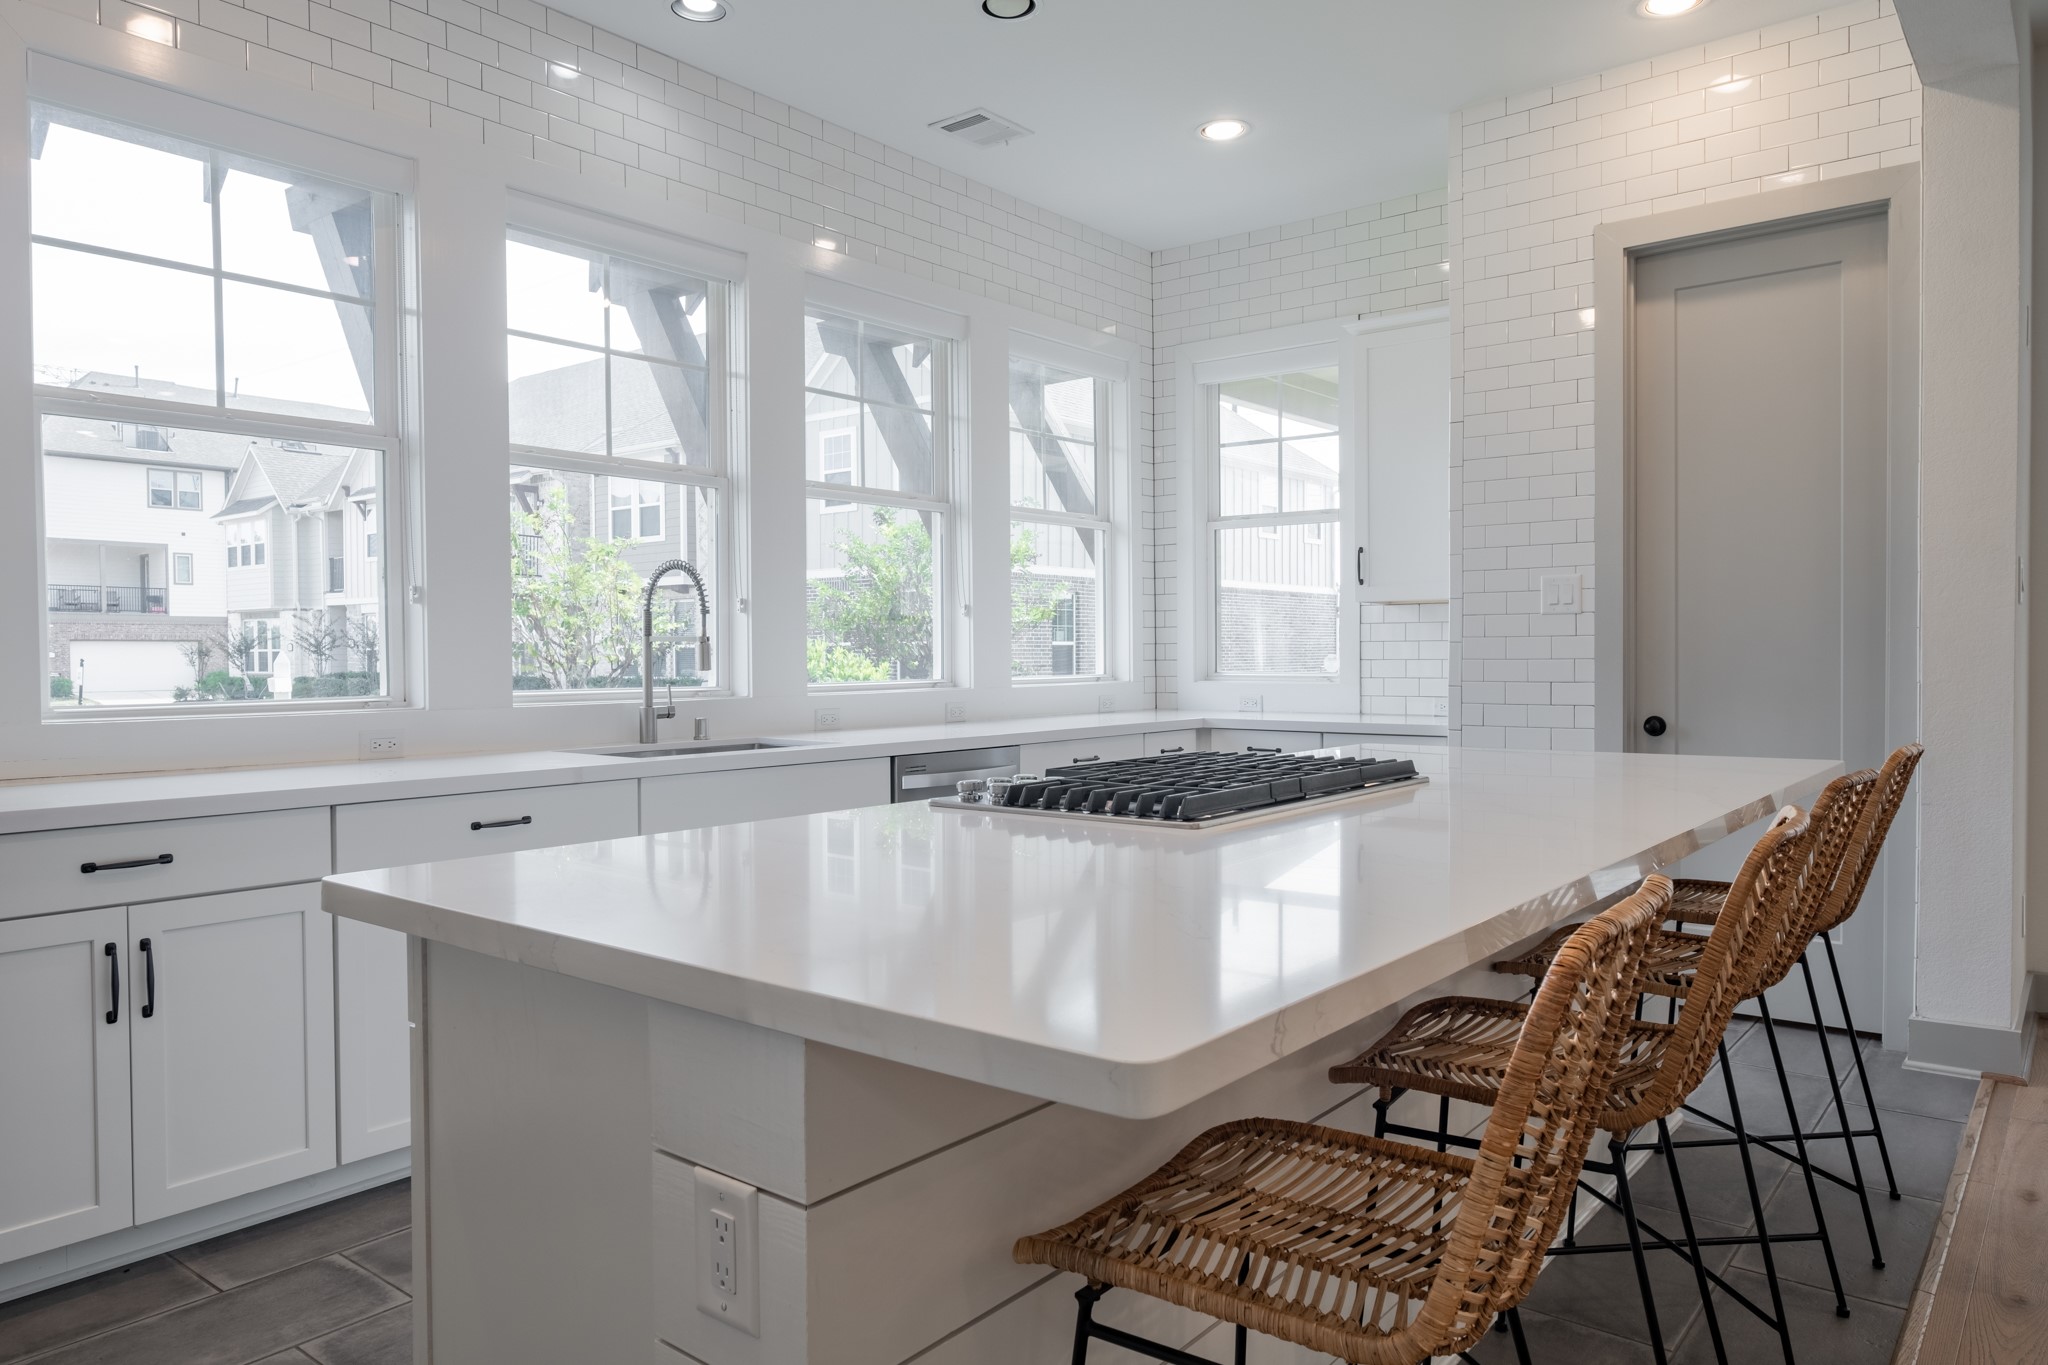 The kitchen is classically elegant with white quartz countertops and marbelized island